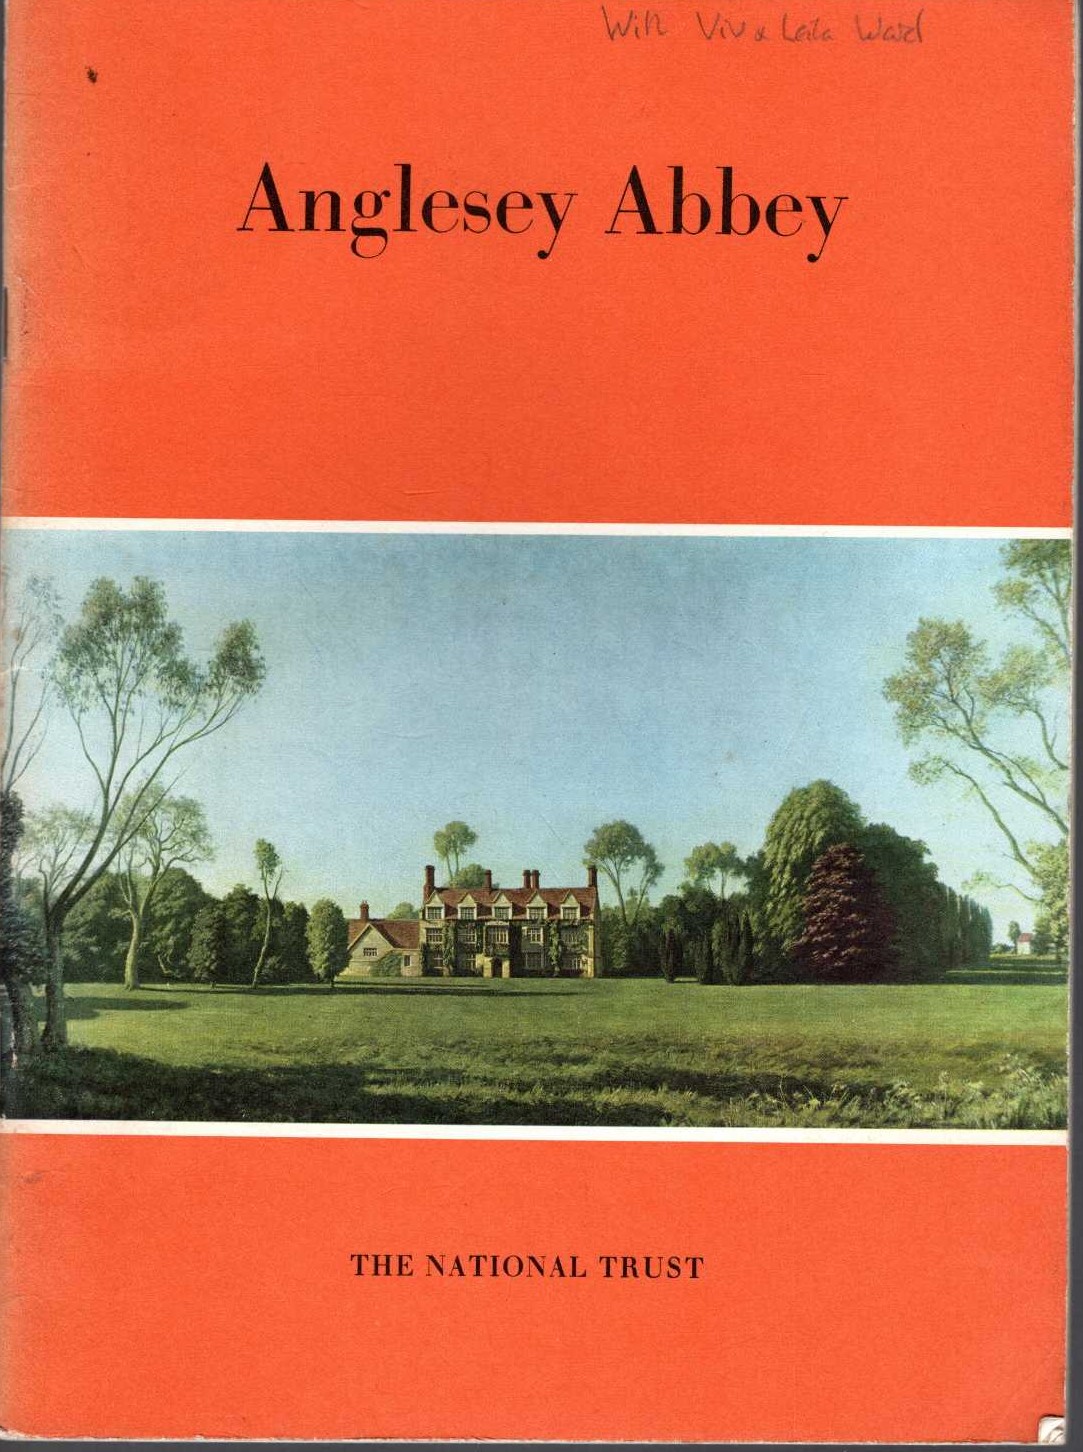 \ ANGLESEY ABBEY by Robin Fedden front book cover image